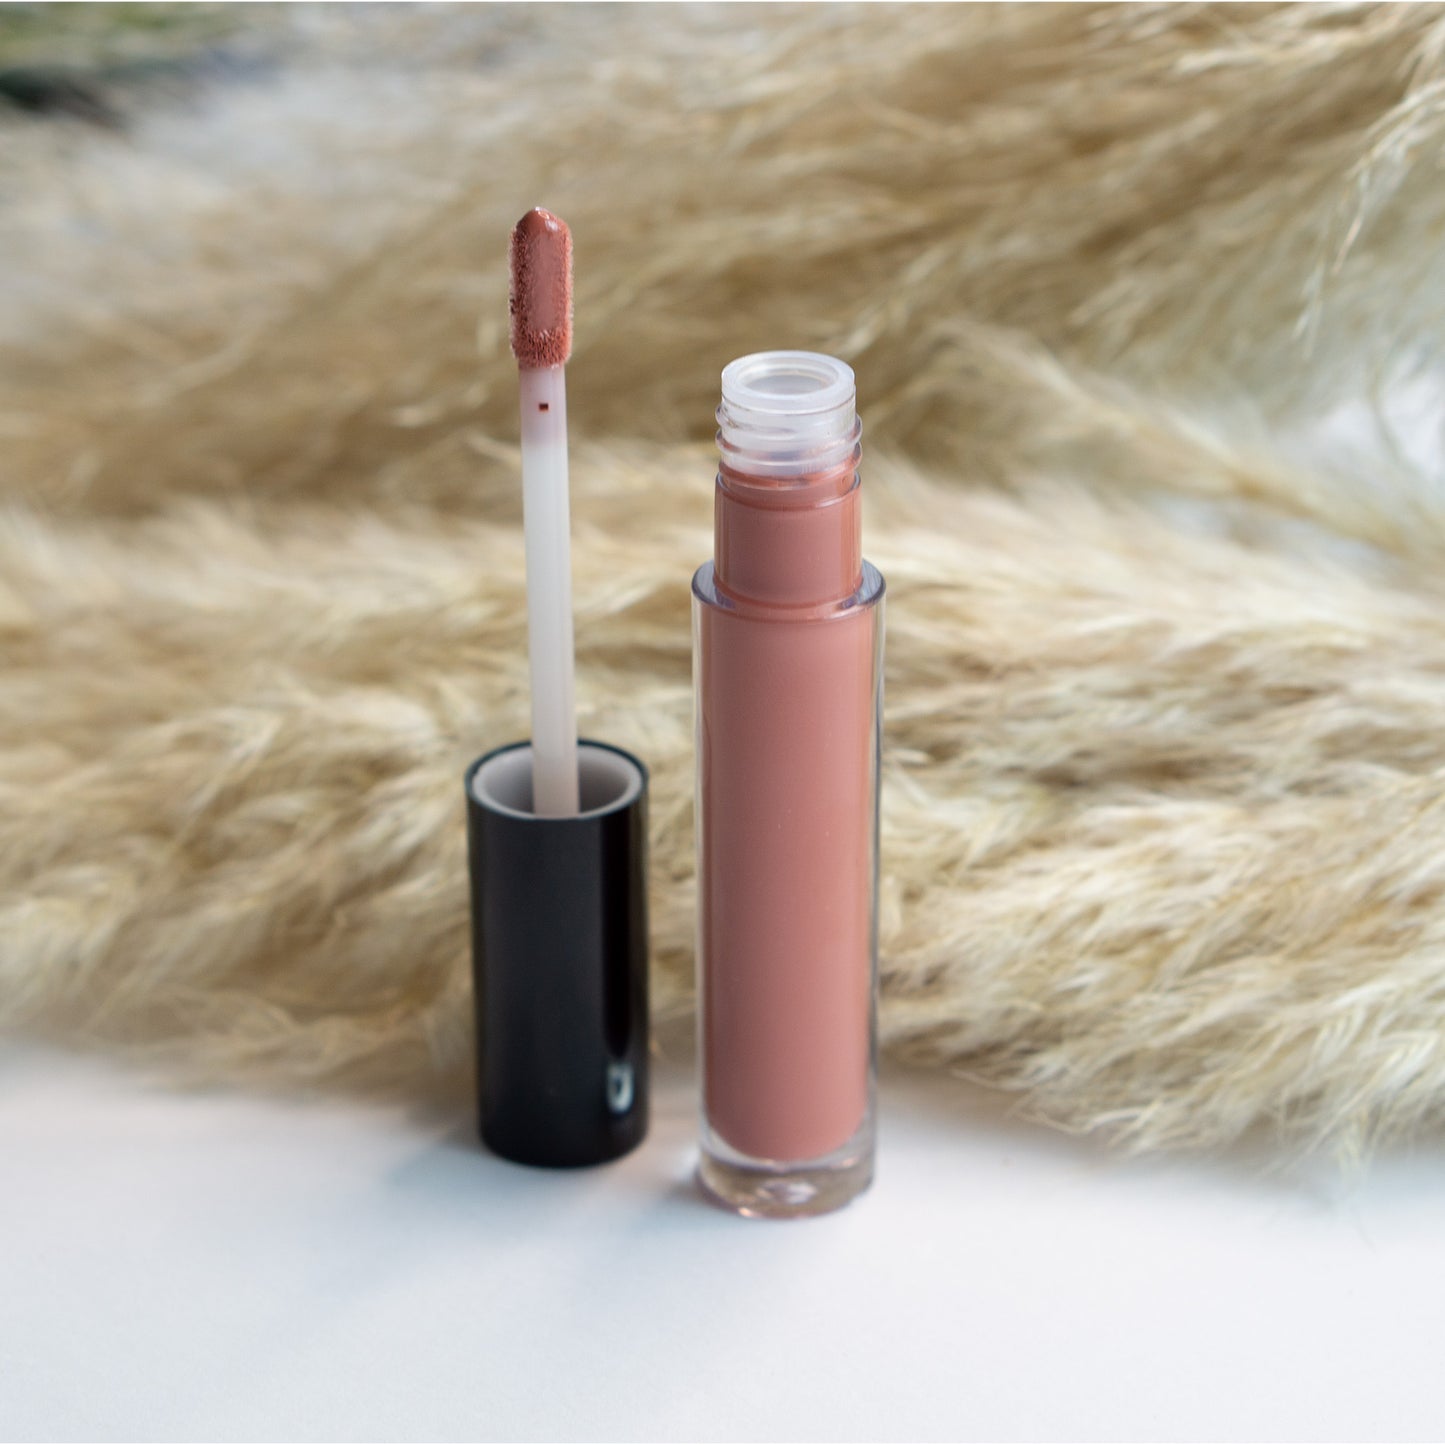 Bring your gloss with you everywhere you go. convenient TSA dimensions. Cruisin Organics Coral Lip Gloss has a liquid shine and SPF. gleam every day. Purchase today for cruzn convenience for women throughout the Coral Reef at our online store.